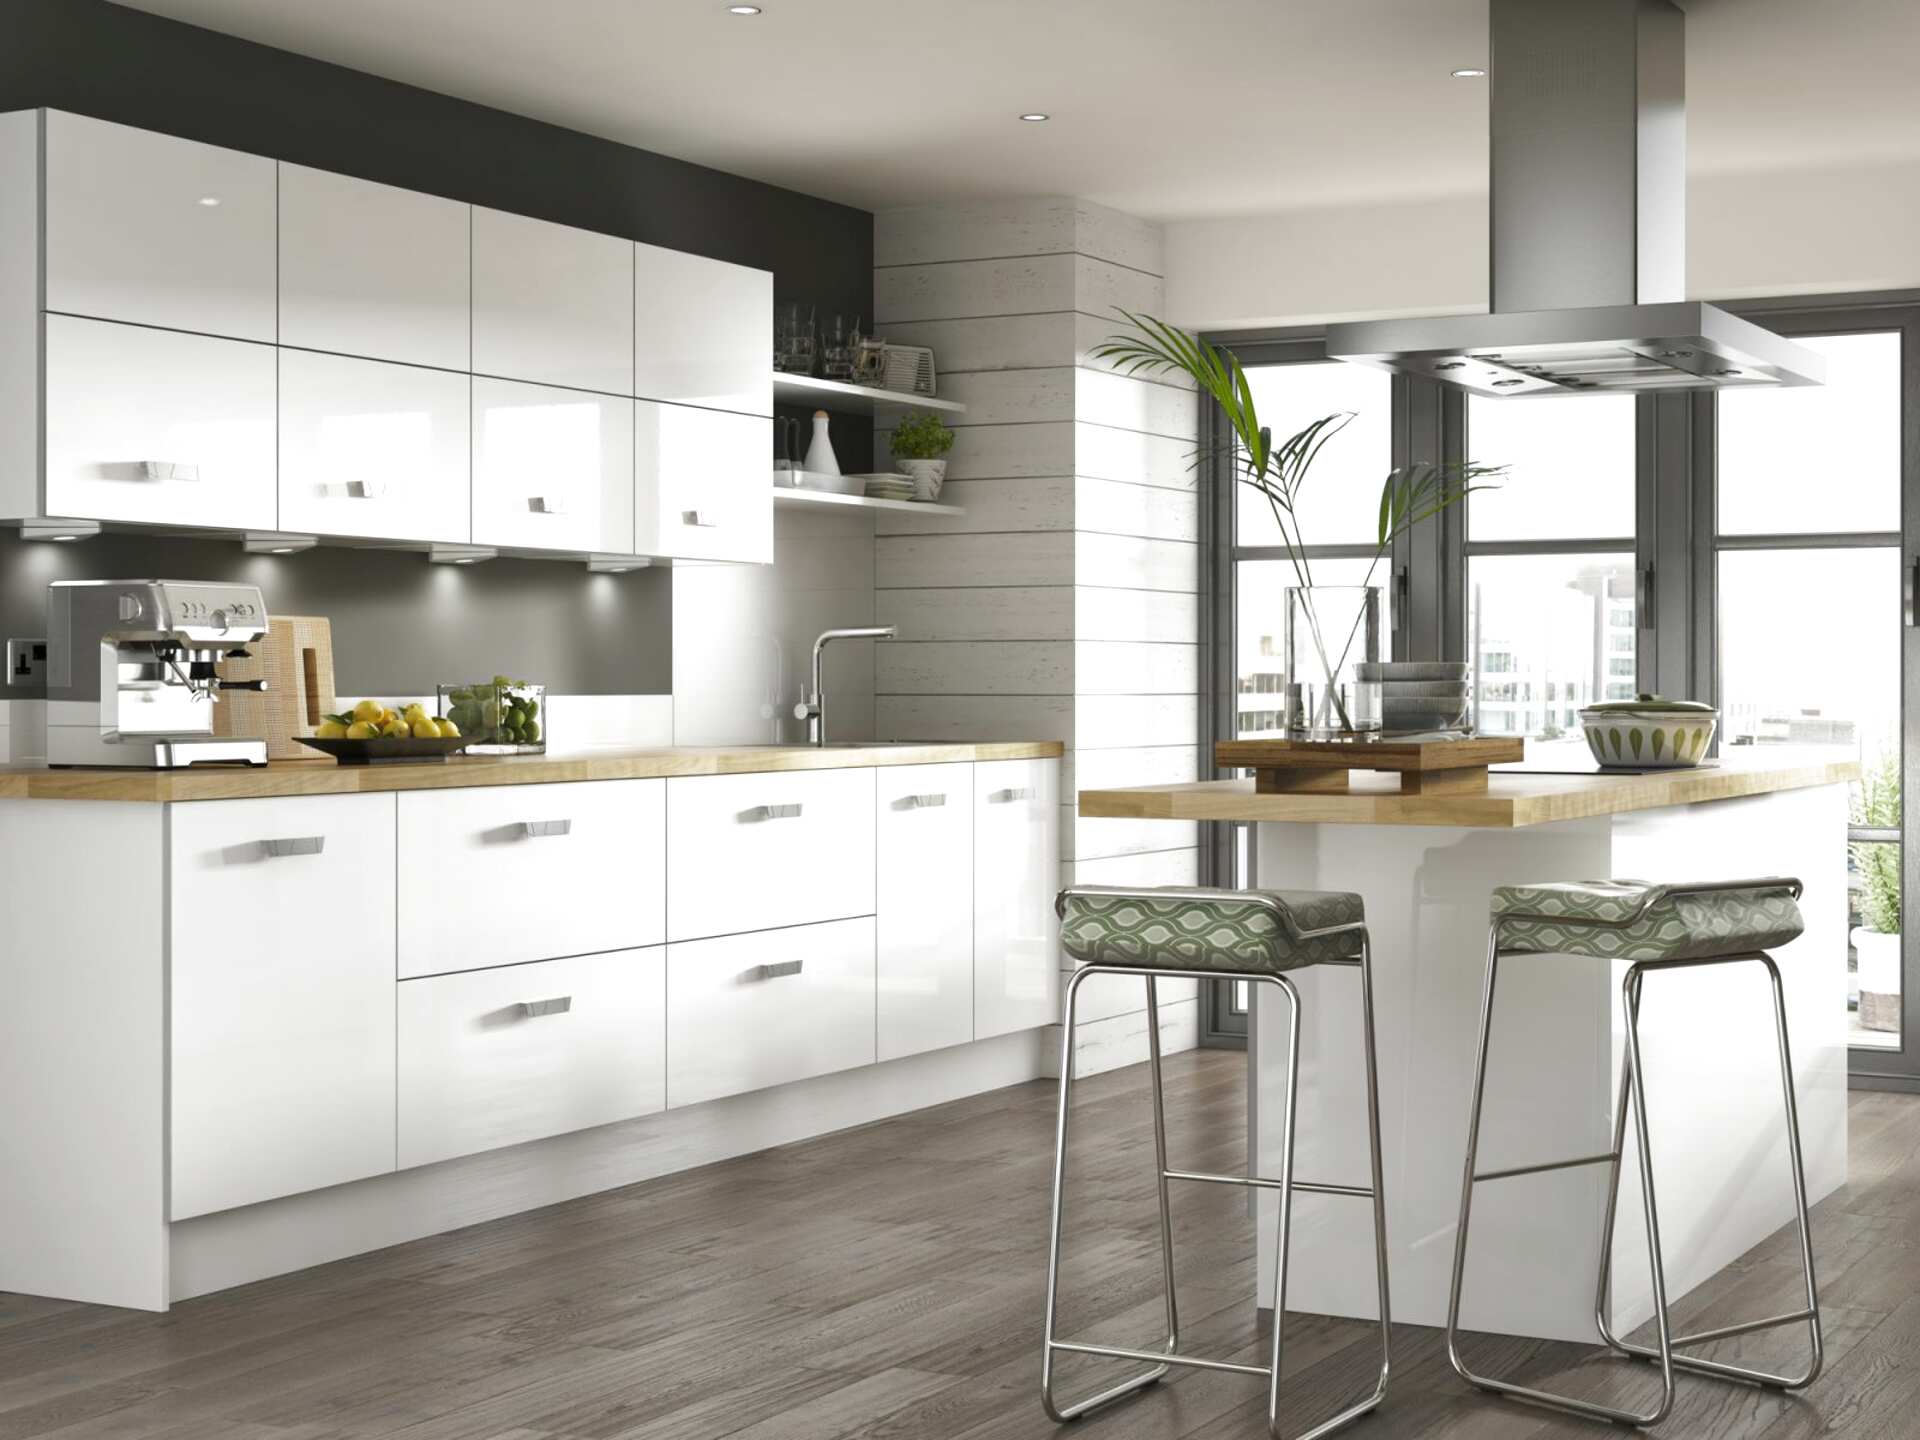 Symphony Kitchen for sale in UK View 42 bargains